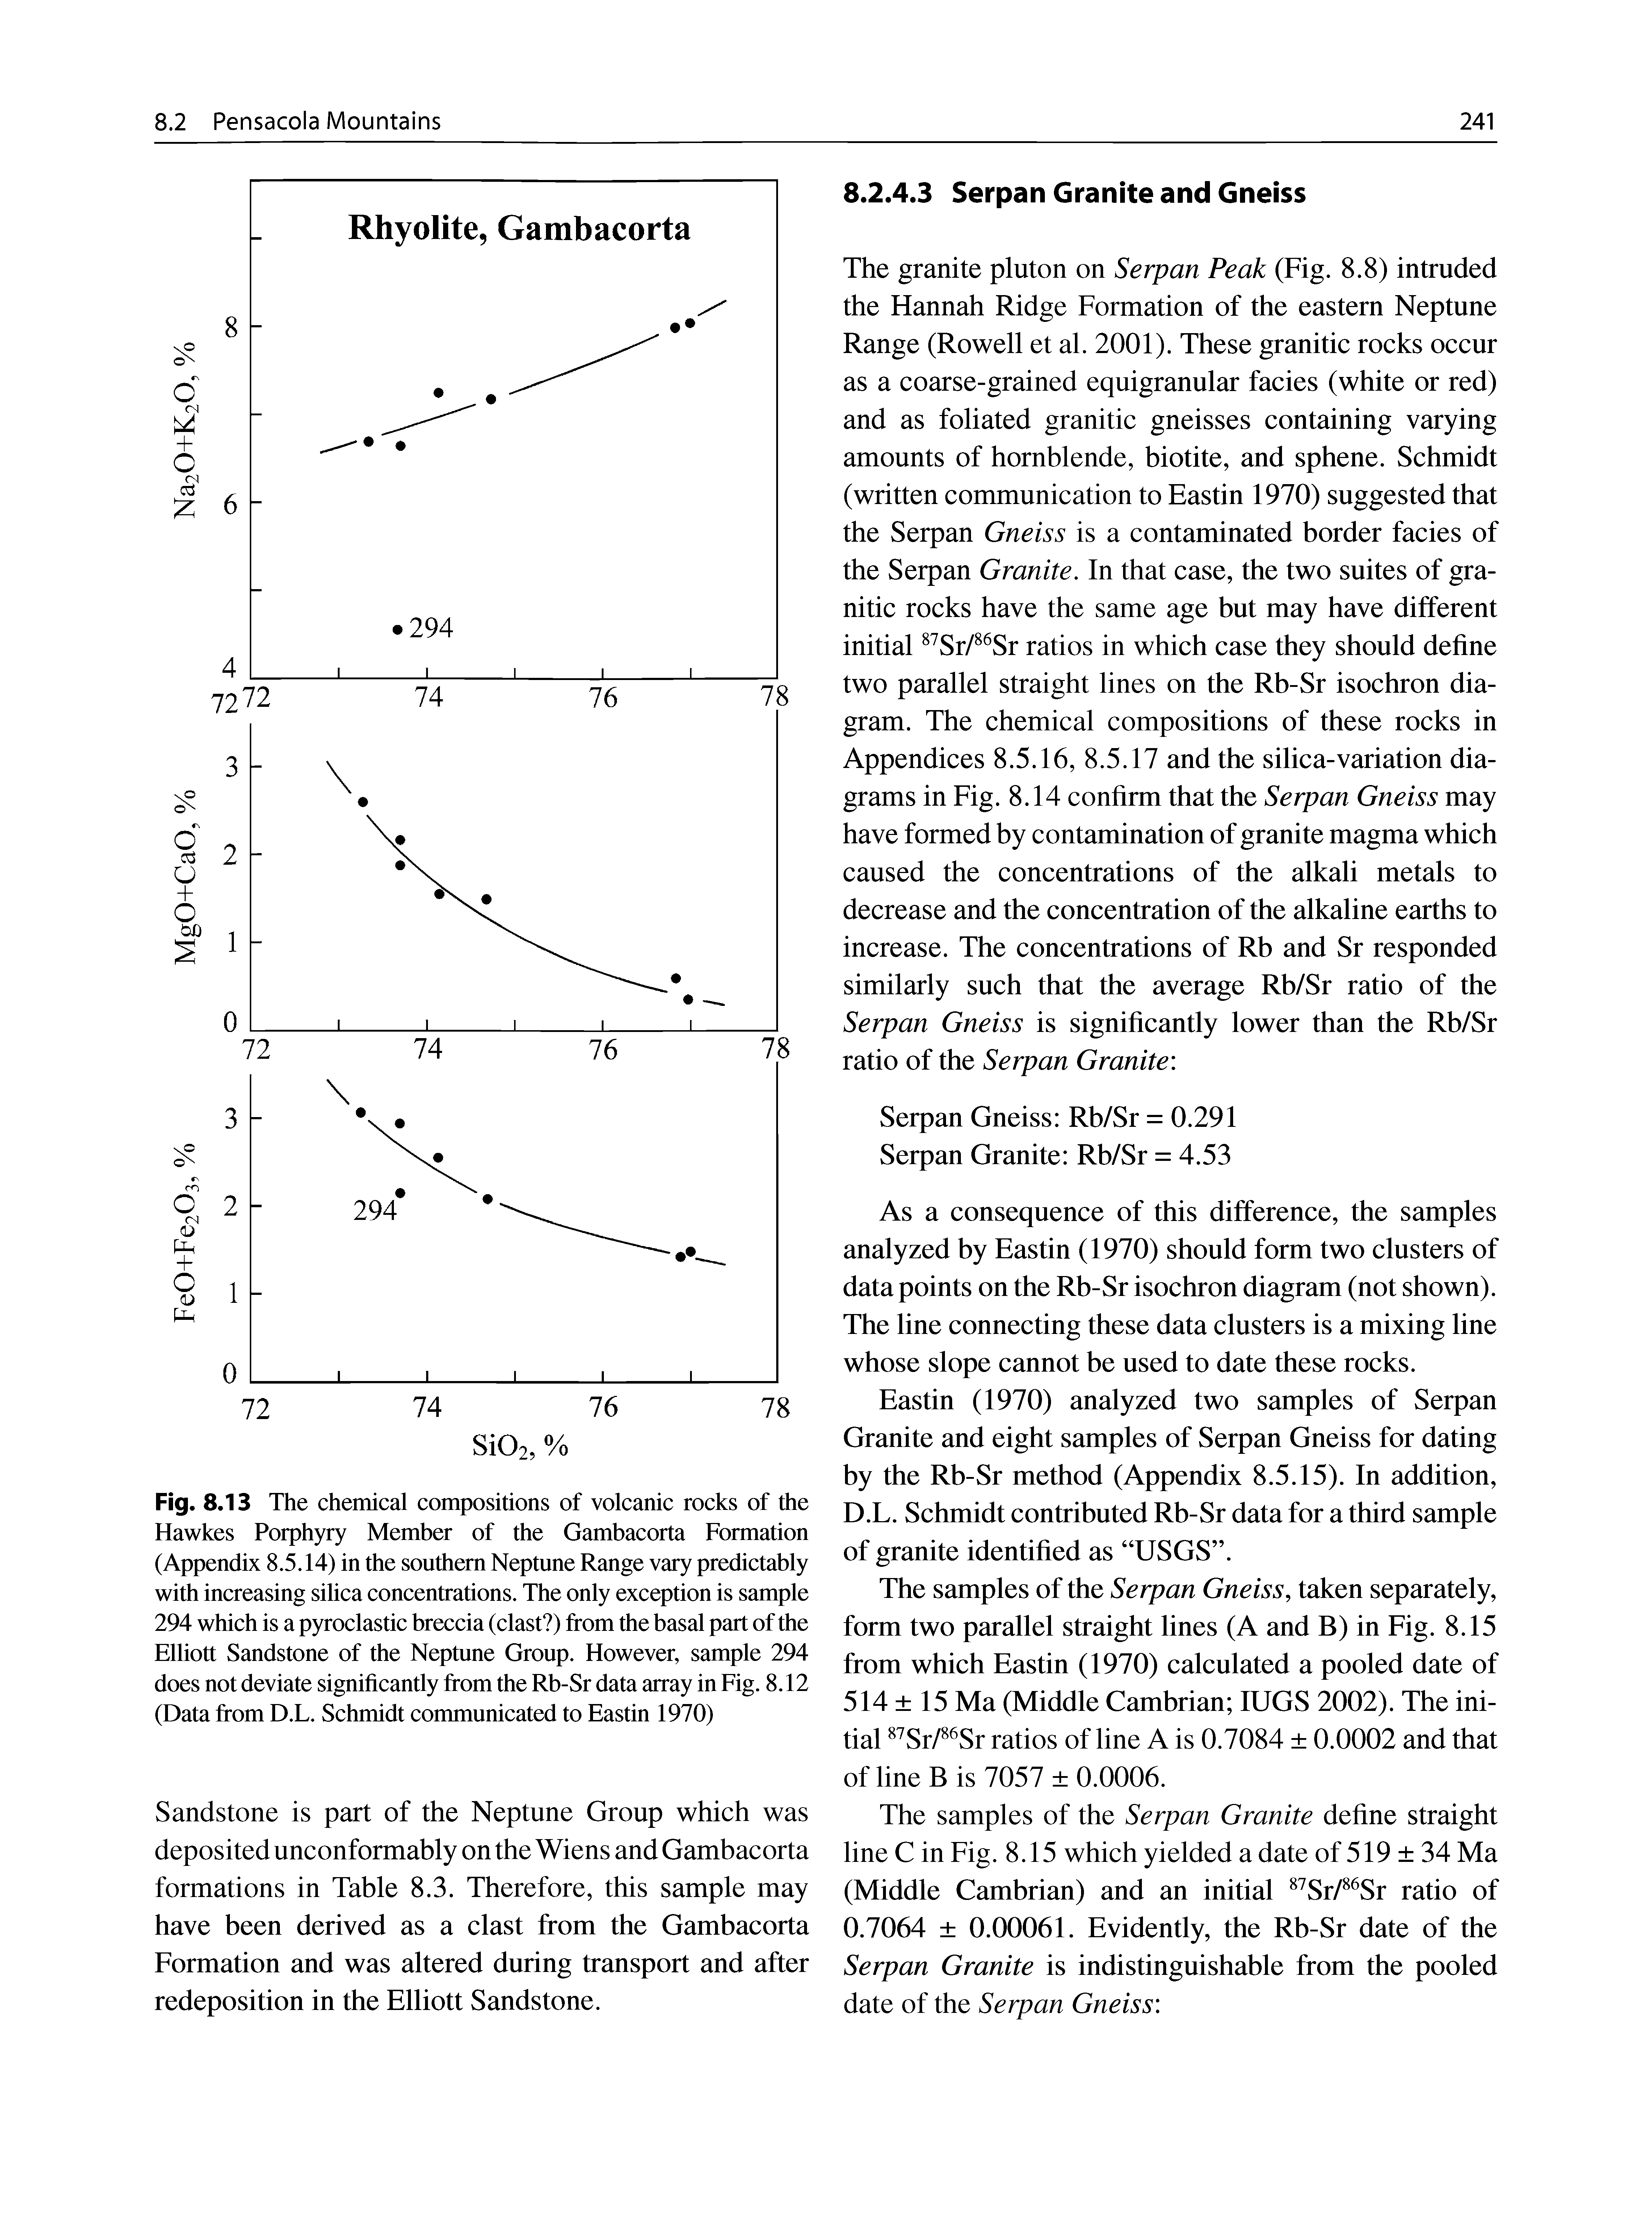 Fig. 8.13 The chemical compositions of volcanic rocks of the Hawkes Porphyry Member of the Gambacorta Formation (Appendix 8.5.14) in the southern Neptune Range vary predictably with increasing silica concentrations. The only exception is sample 294 which is a pyroclastic breccia (clast ) from the basal part of the Elliott Sandstone of the Neptune Group. However, sample 294 does not deviate significantly from the Rb-Sr data array in Fig. 8.12 (Data from D.L. Schmidt communicated to Eastin 1970)...